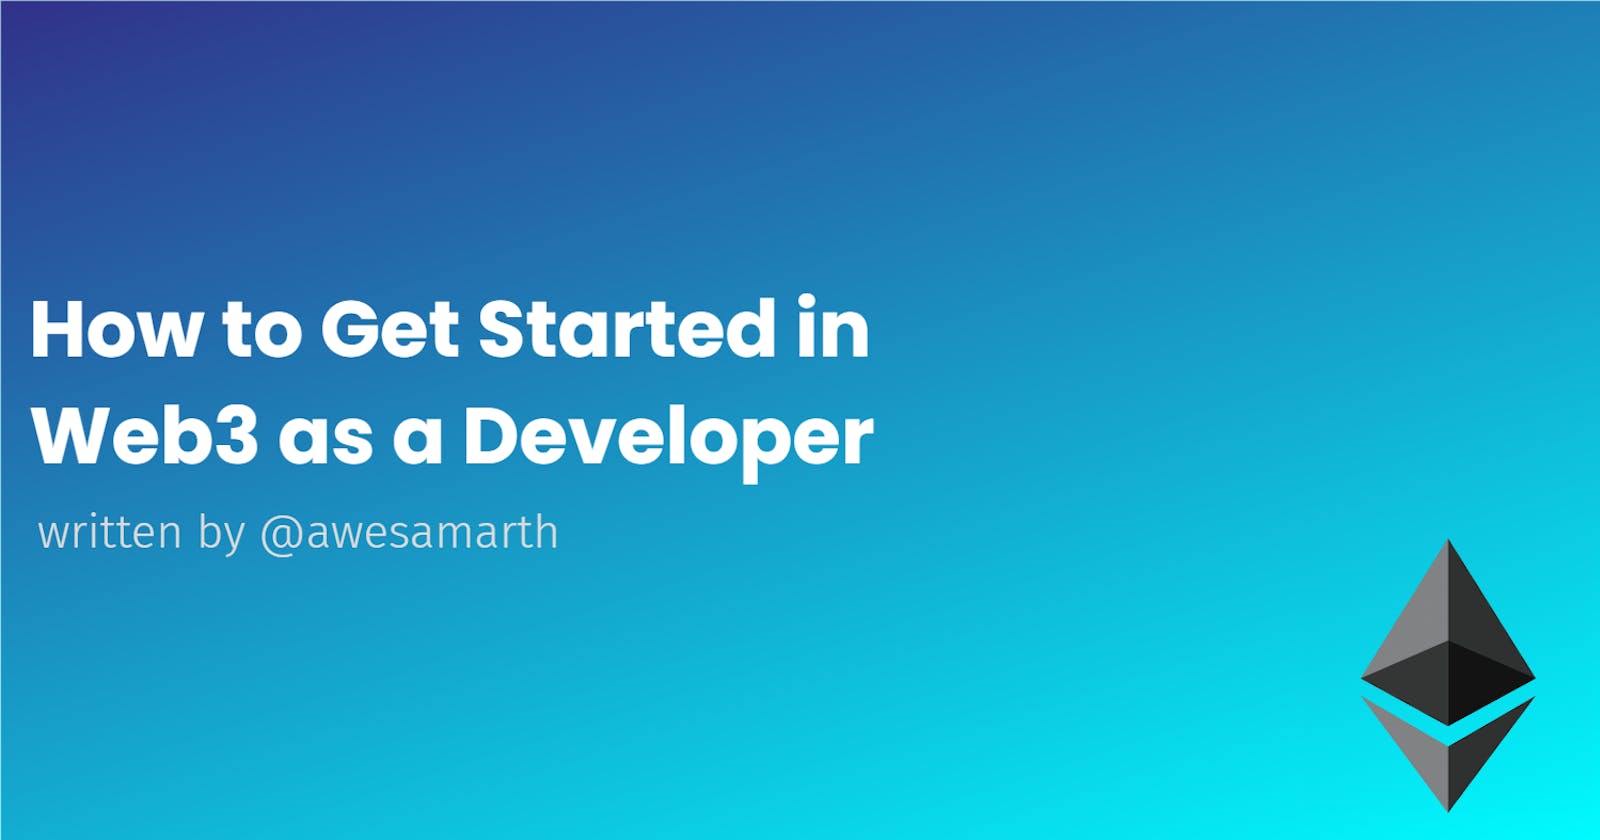 How to Get Started in Web3 as a Developer